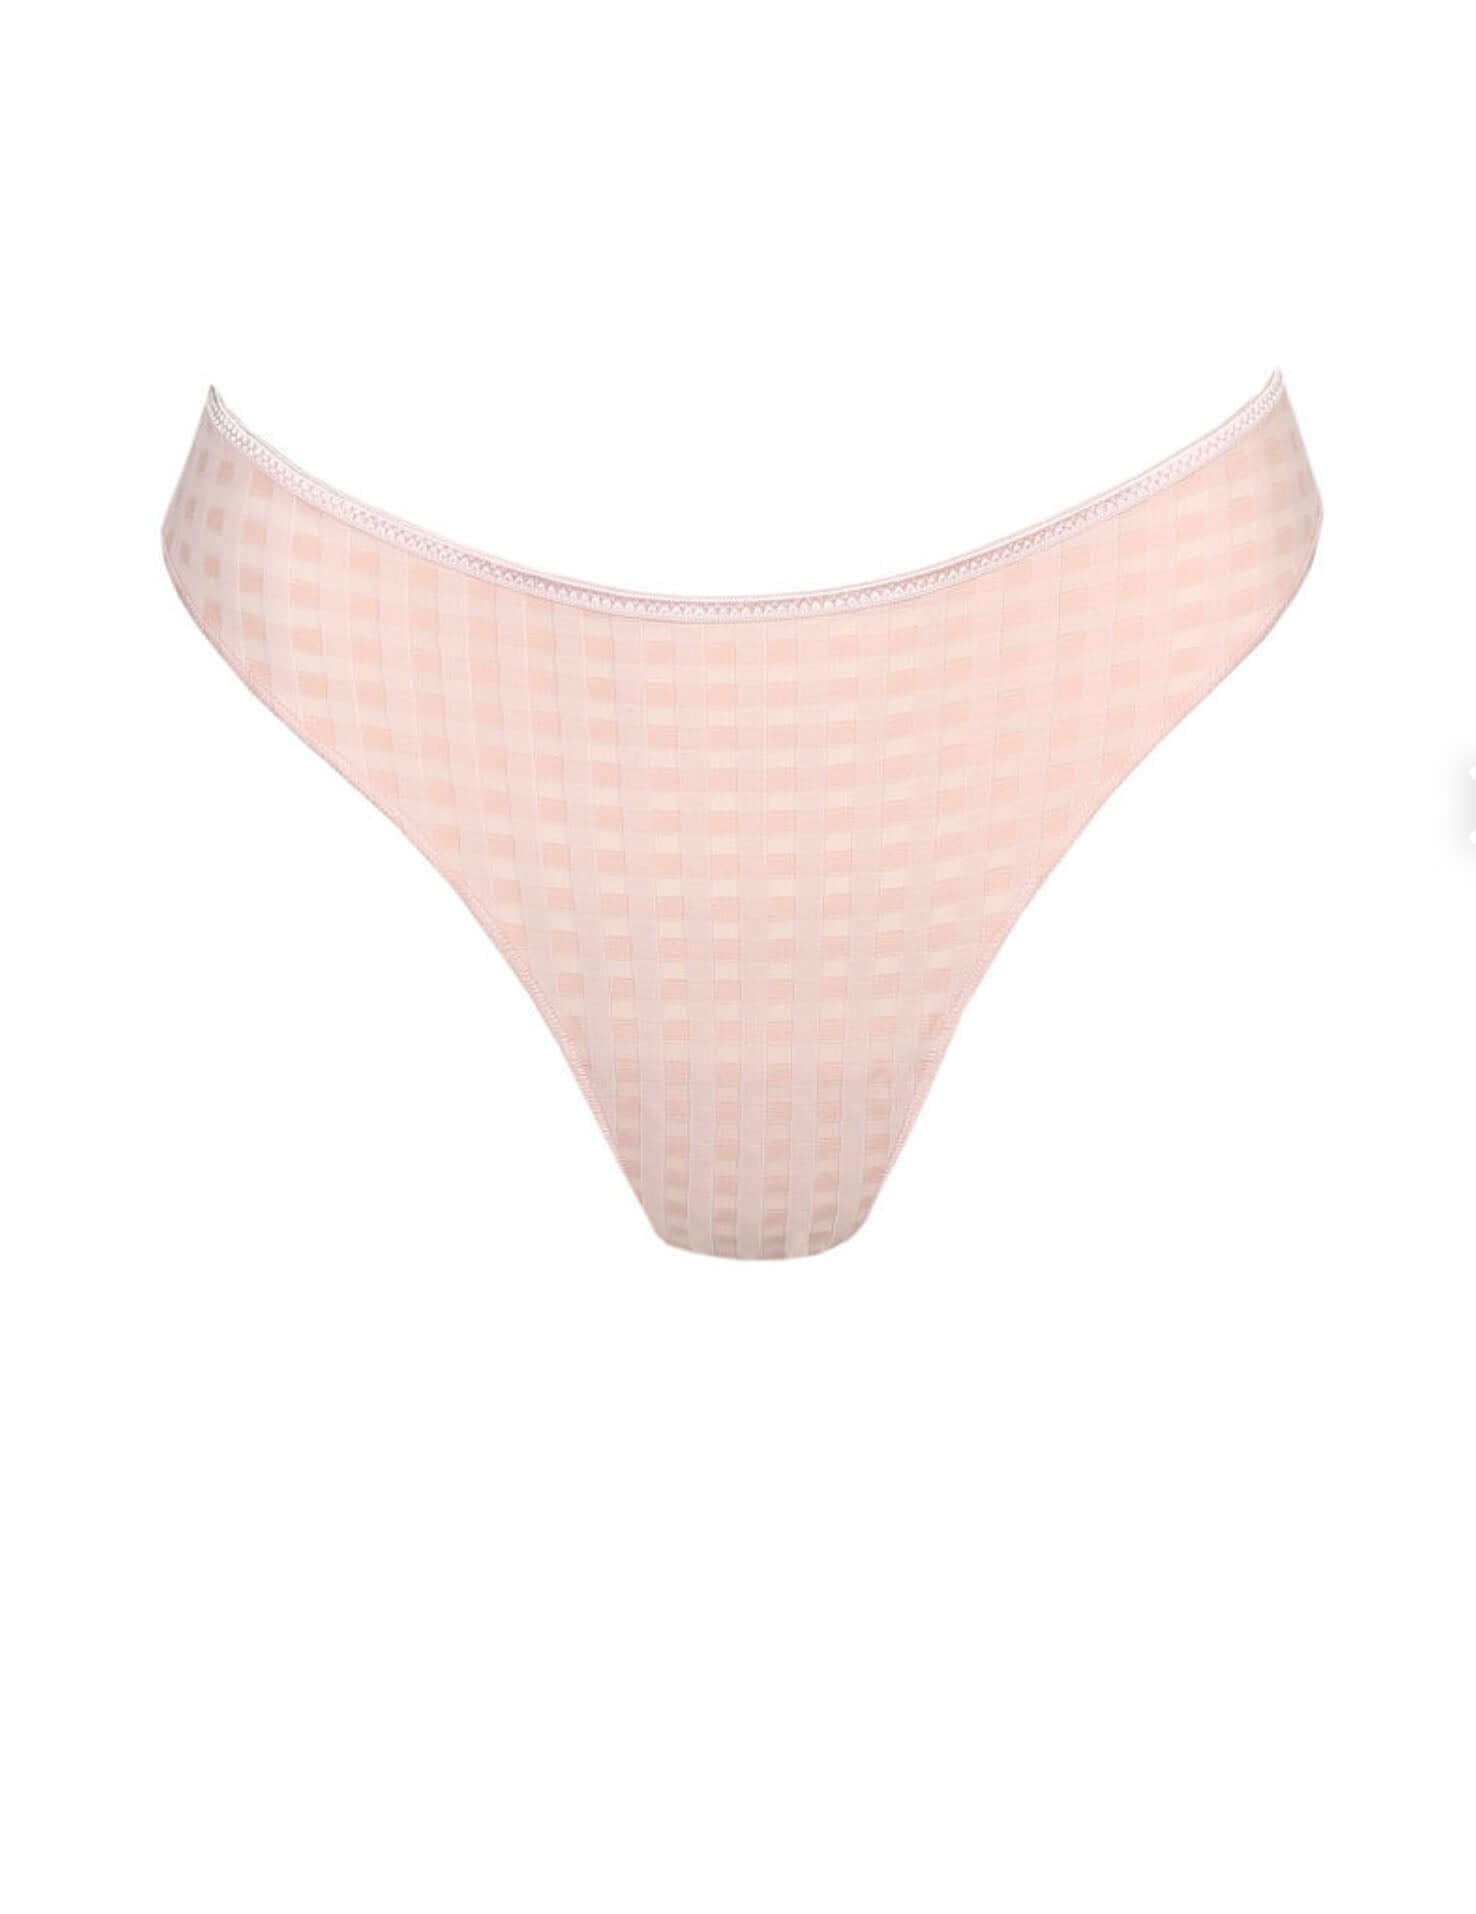 Marie Jo Avero Thong Color: Pearl Pink Size: XS at Petticoat Lane  Greenwich, CT